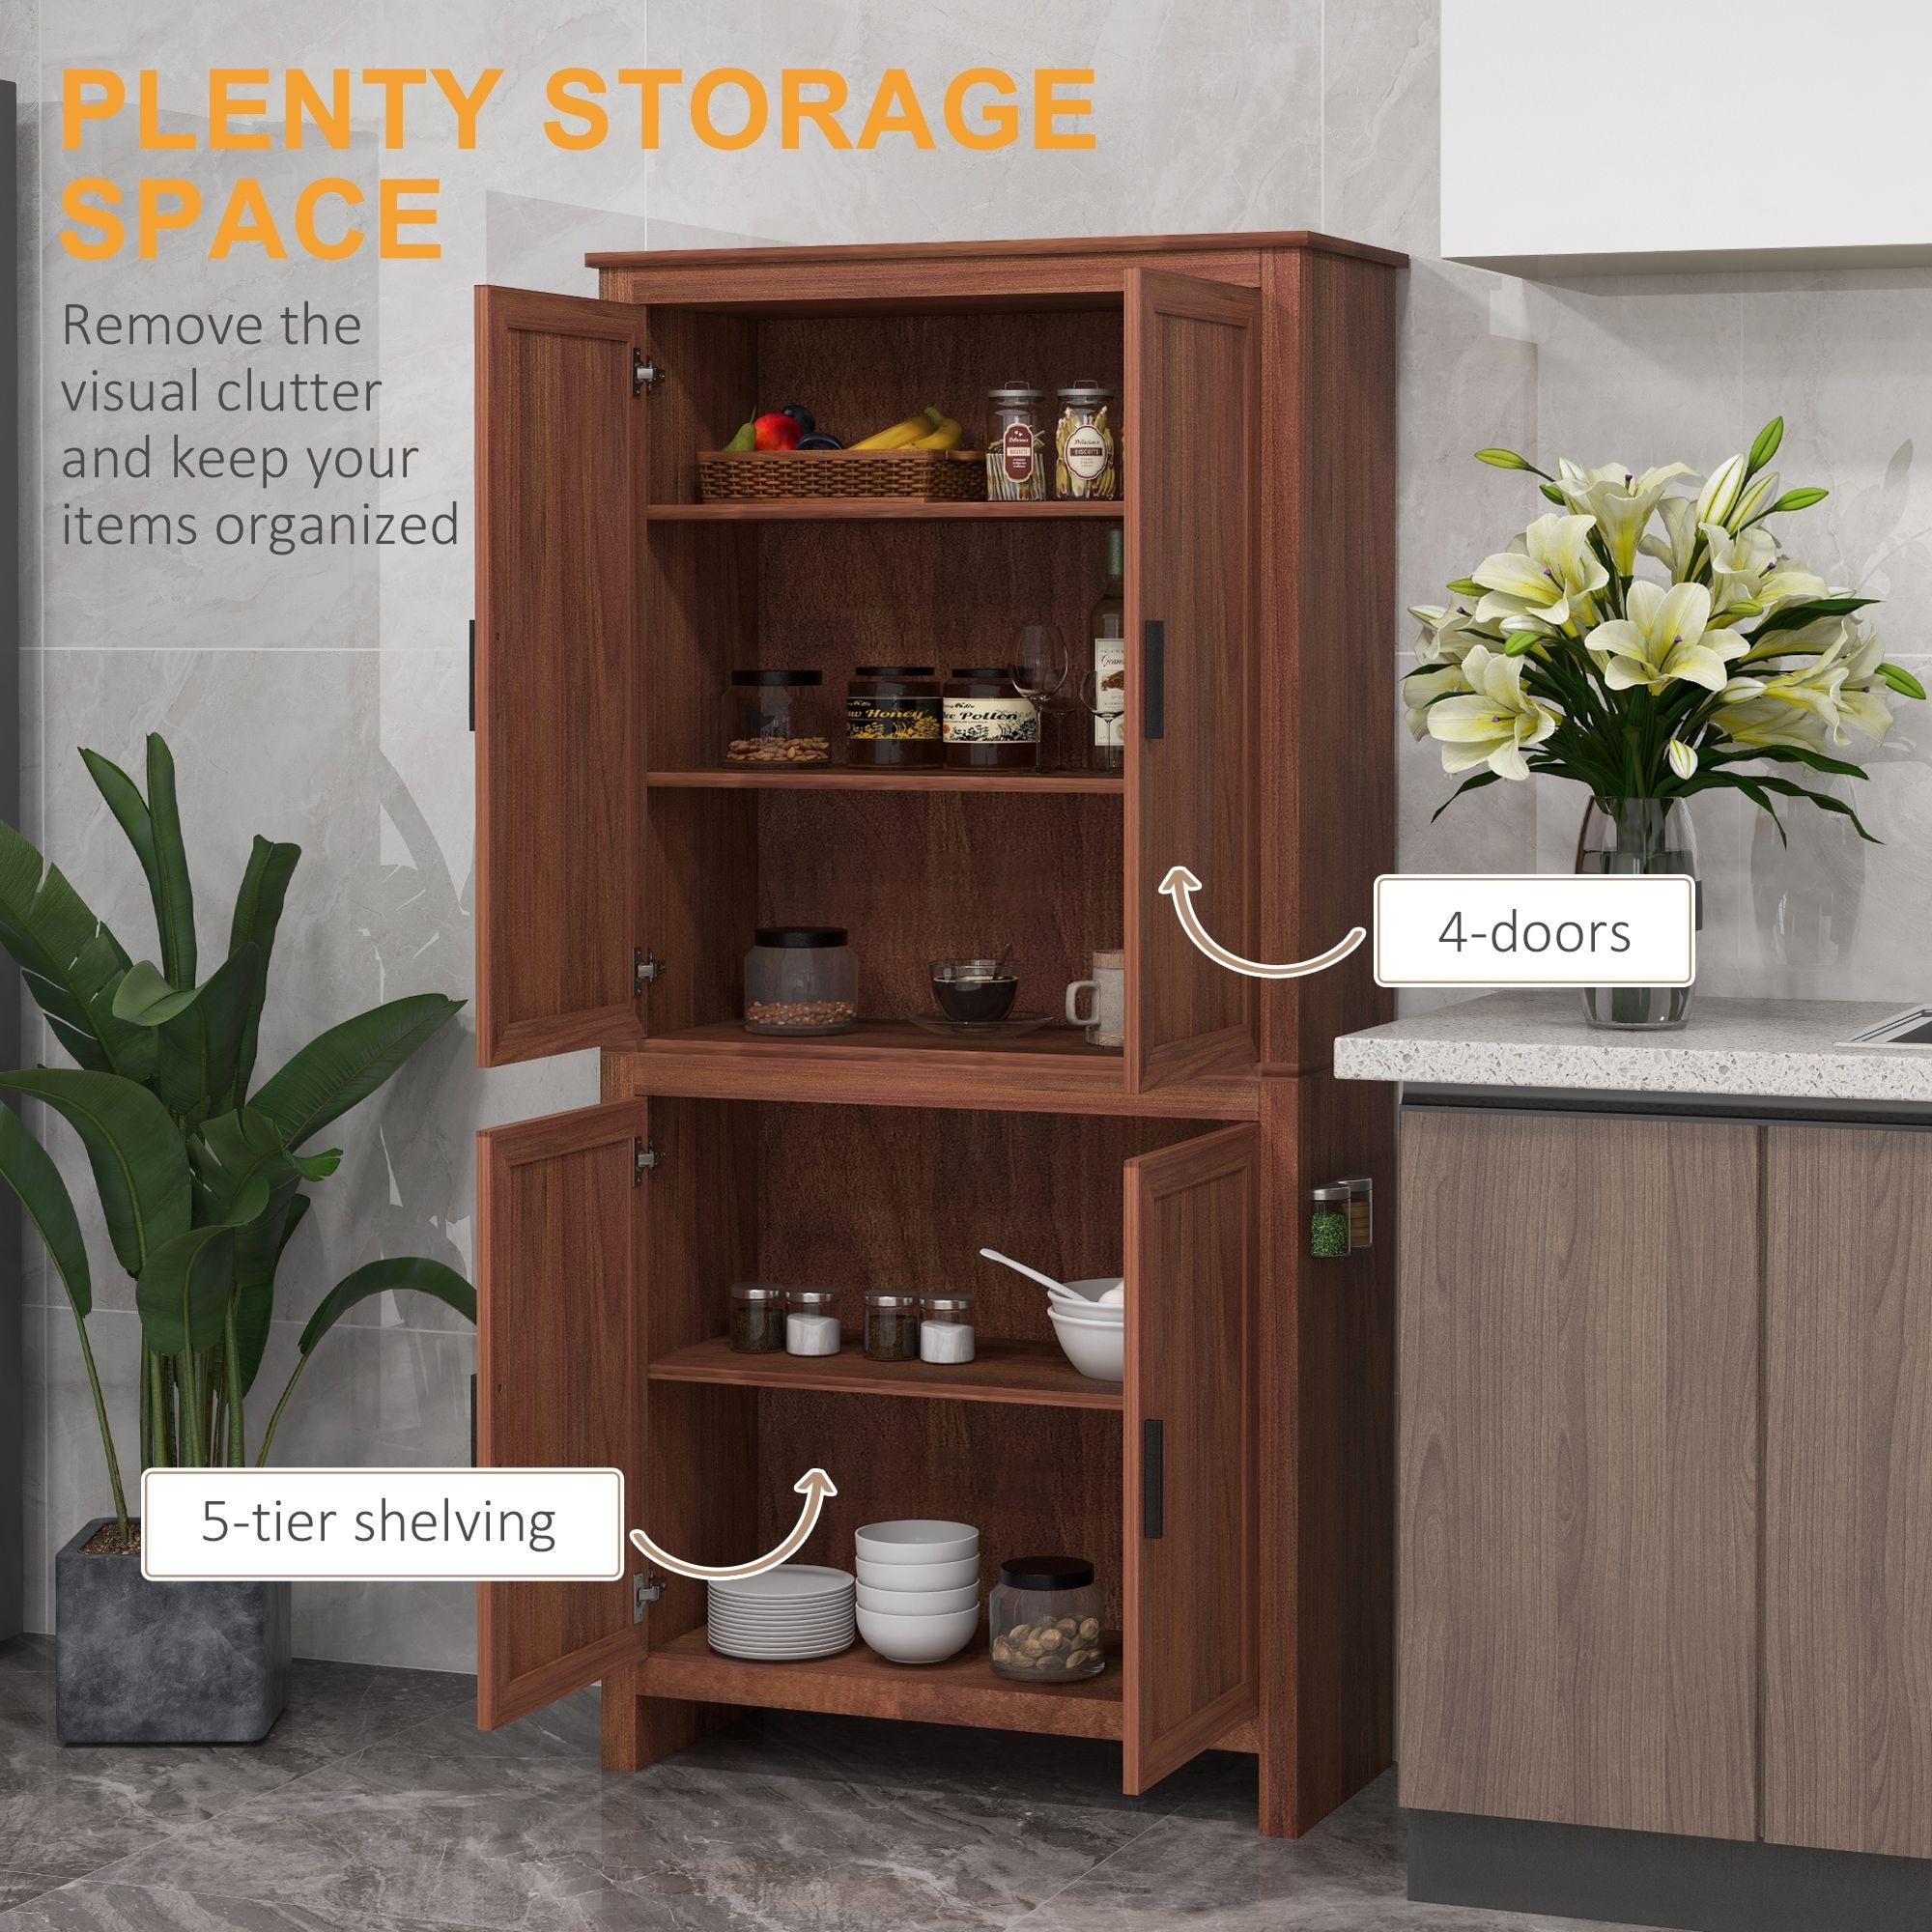 https://ak1.ostkcdn.com/images/products/is/images/direct/e8afc8b5c2bdbf6ada17176ec2ed49e38dfc94ab/HOMCOM-64%22-4-Door-Kitchen-Pantry%2C-Freestanding-Storage-Cabinet-with-3-Adjustable-Shelves-for-Kitchen.jpg